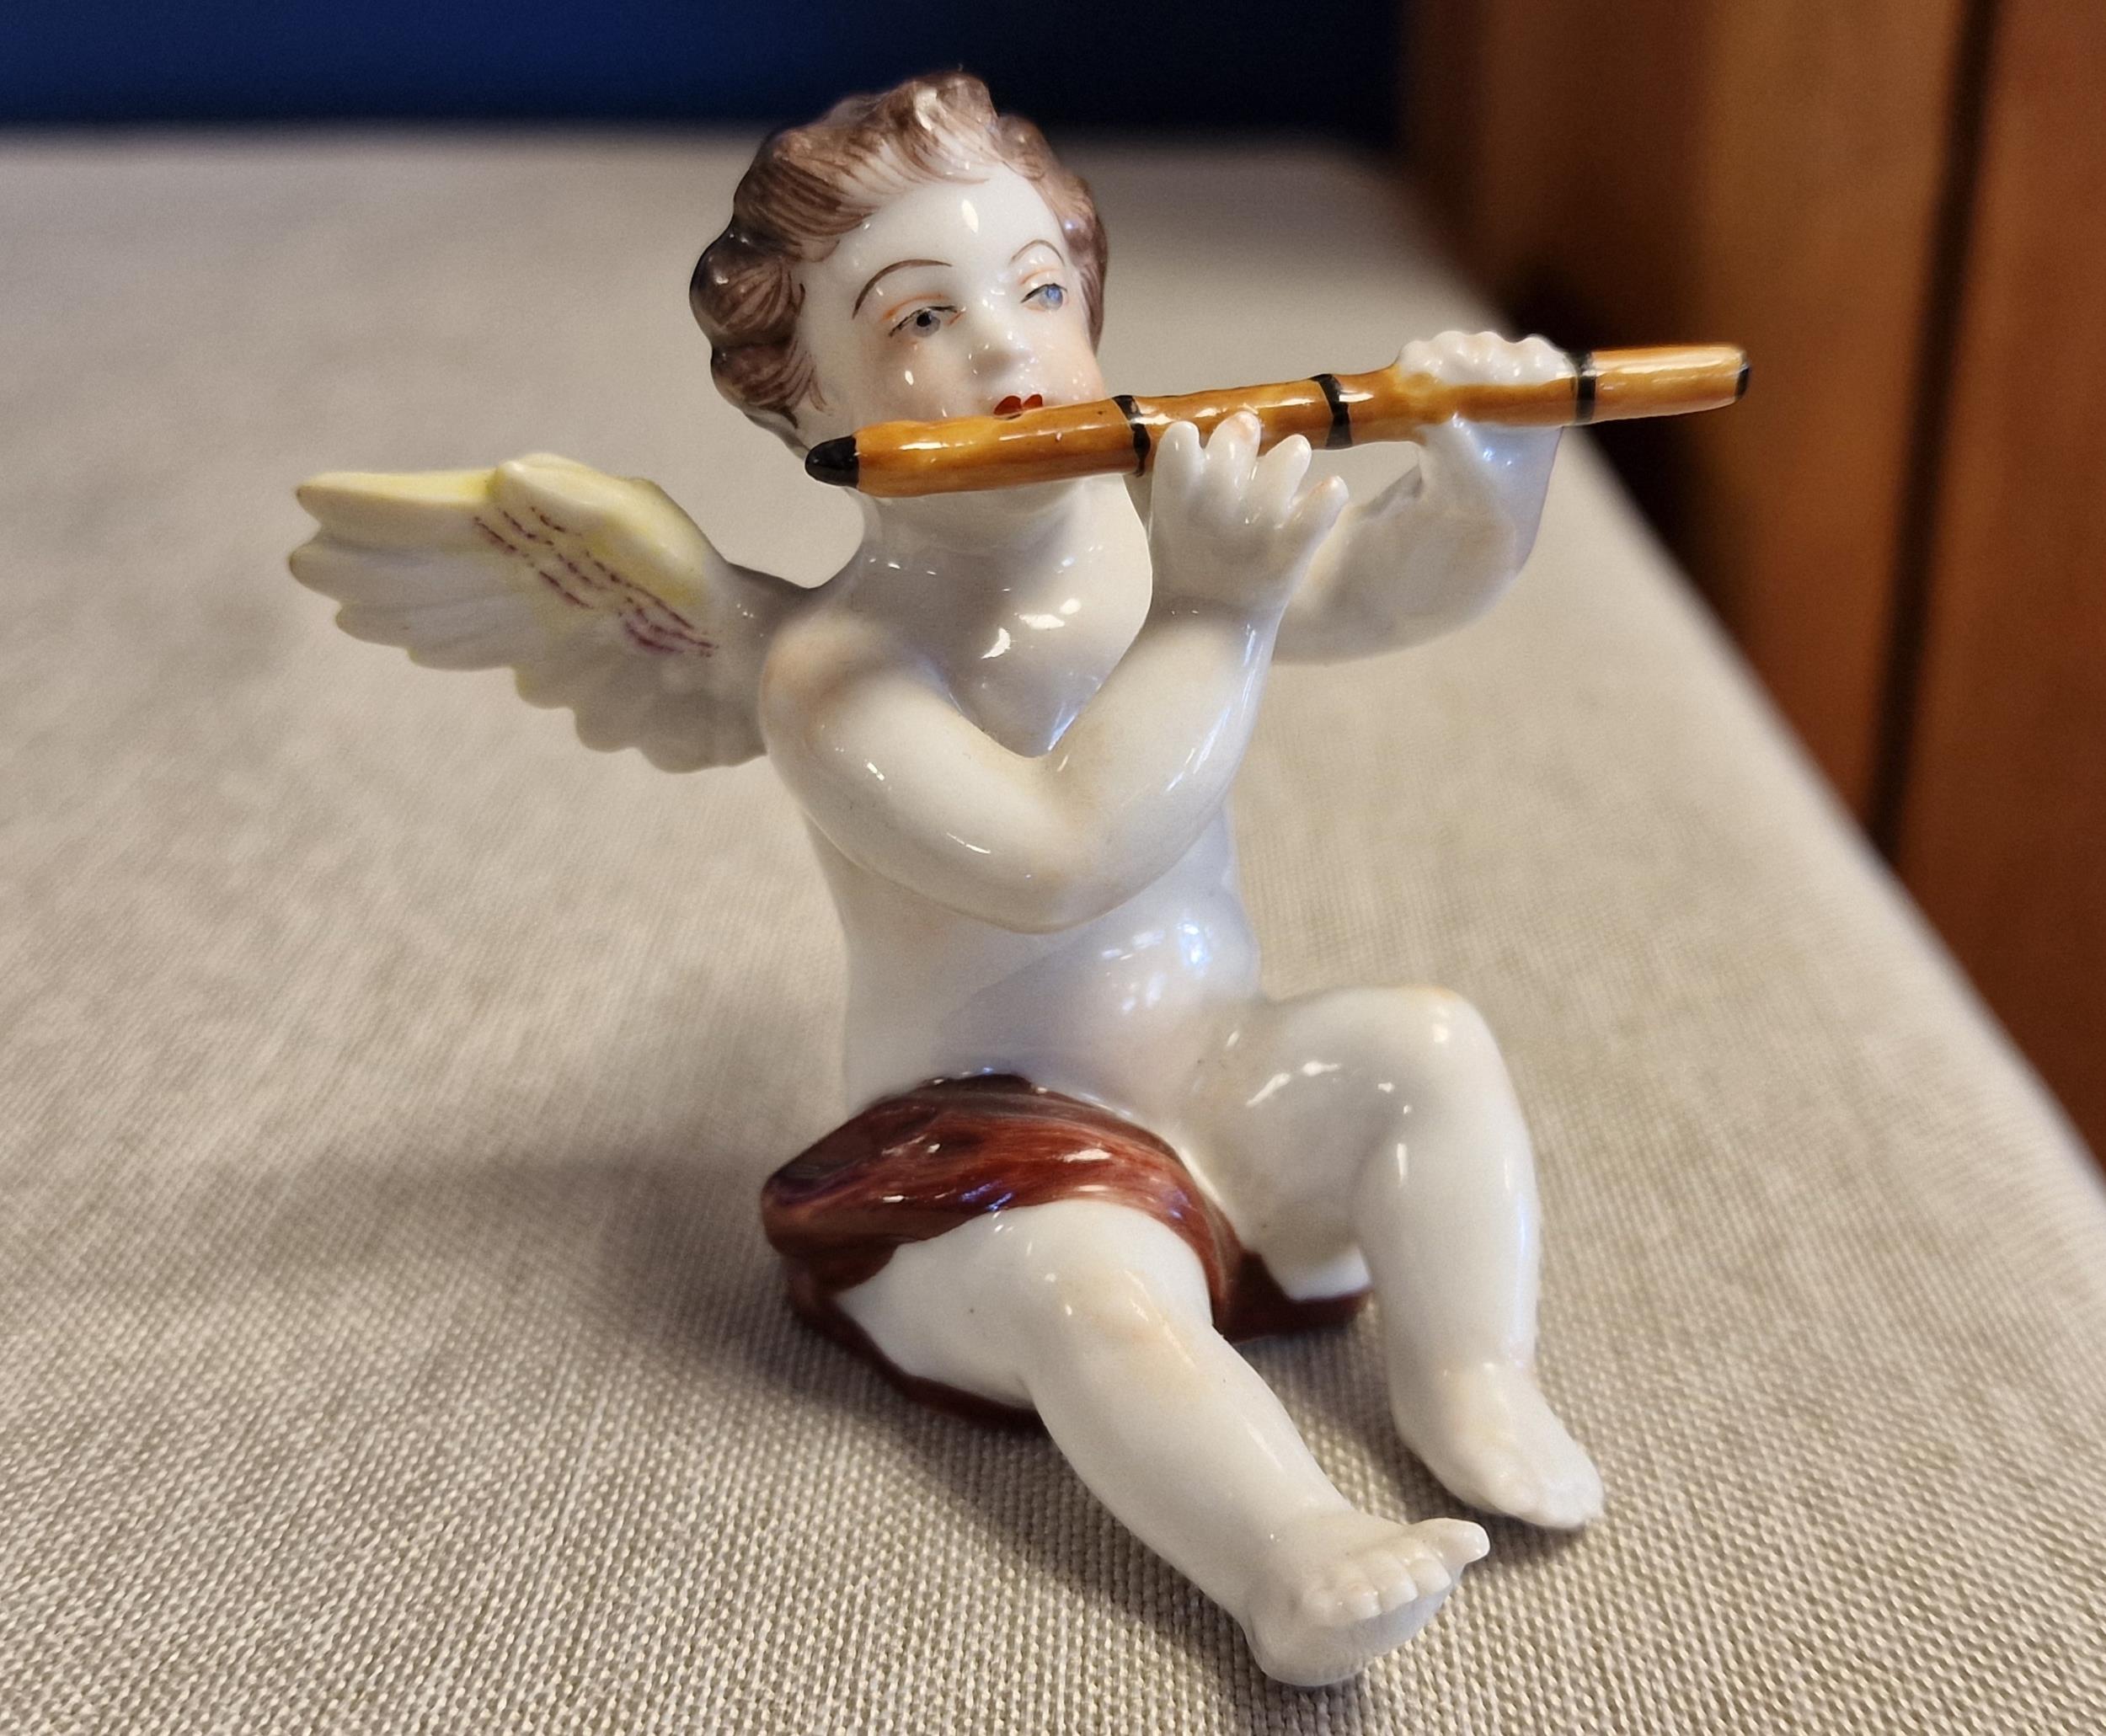 Volkstedt Antique German Cherub Doll Music Band - 9pc and in Good Condition - Meissen Interest - Image 2 of 3